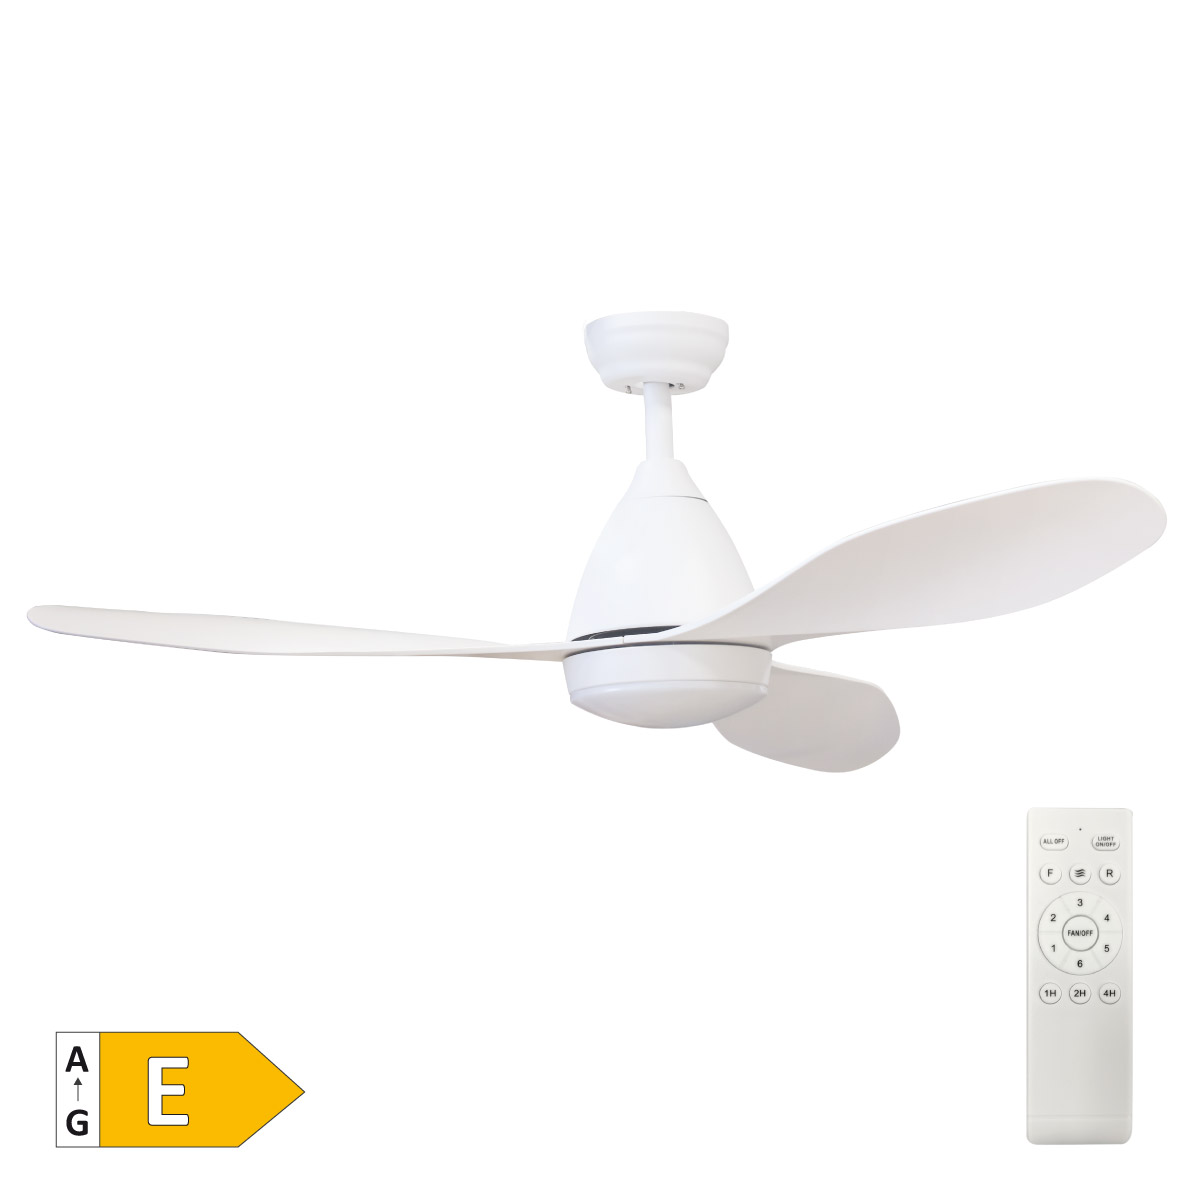 48' DC ceiling fan with remote control and wifi 3000K 3 blades White